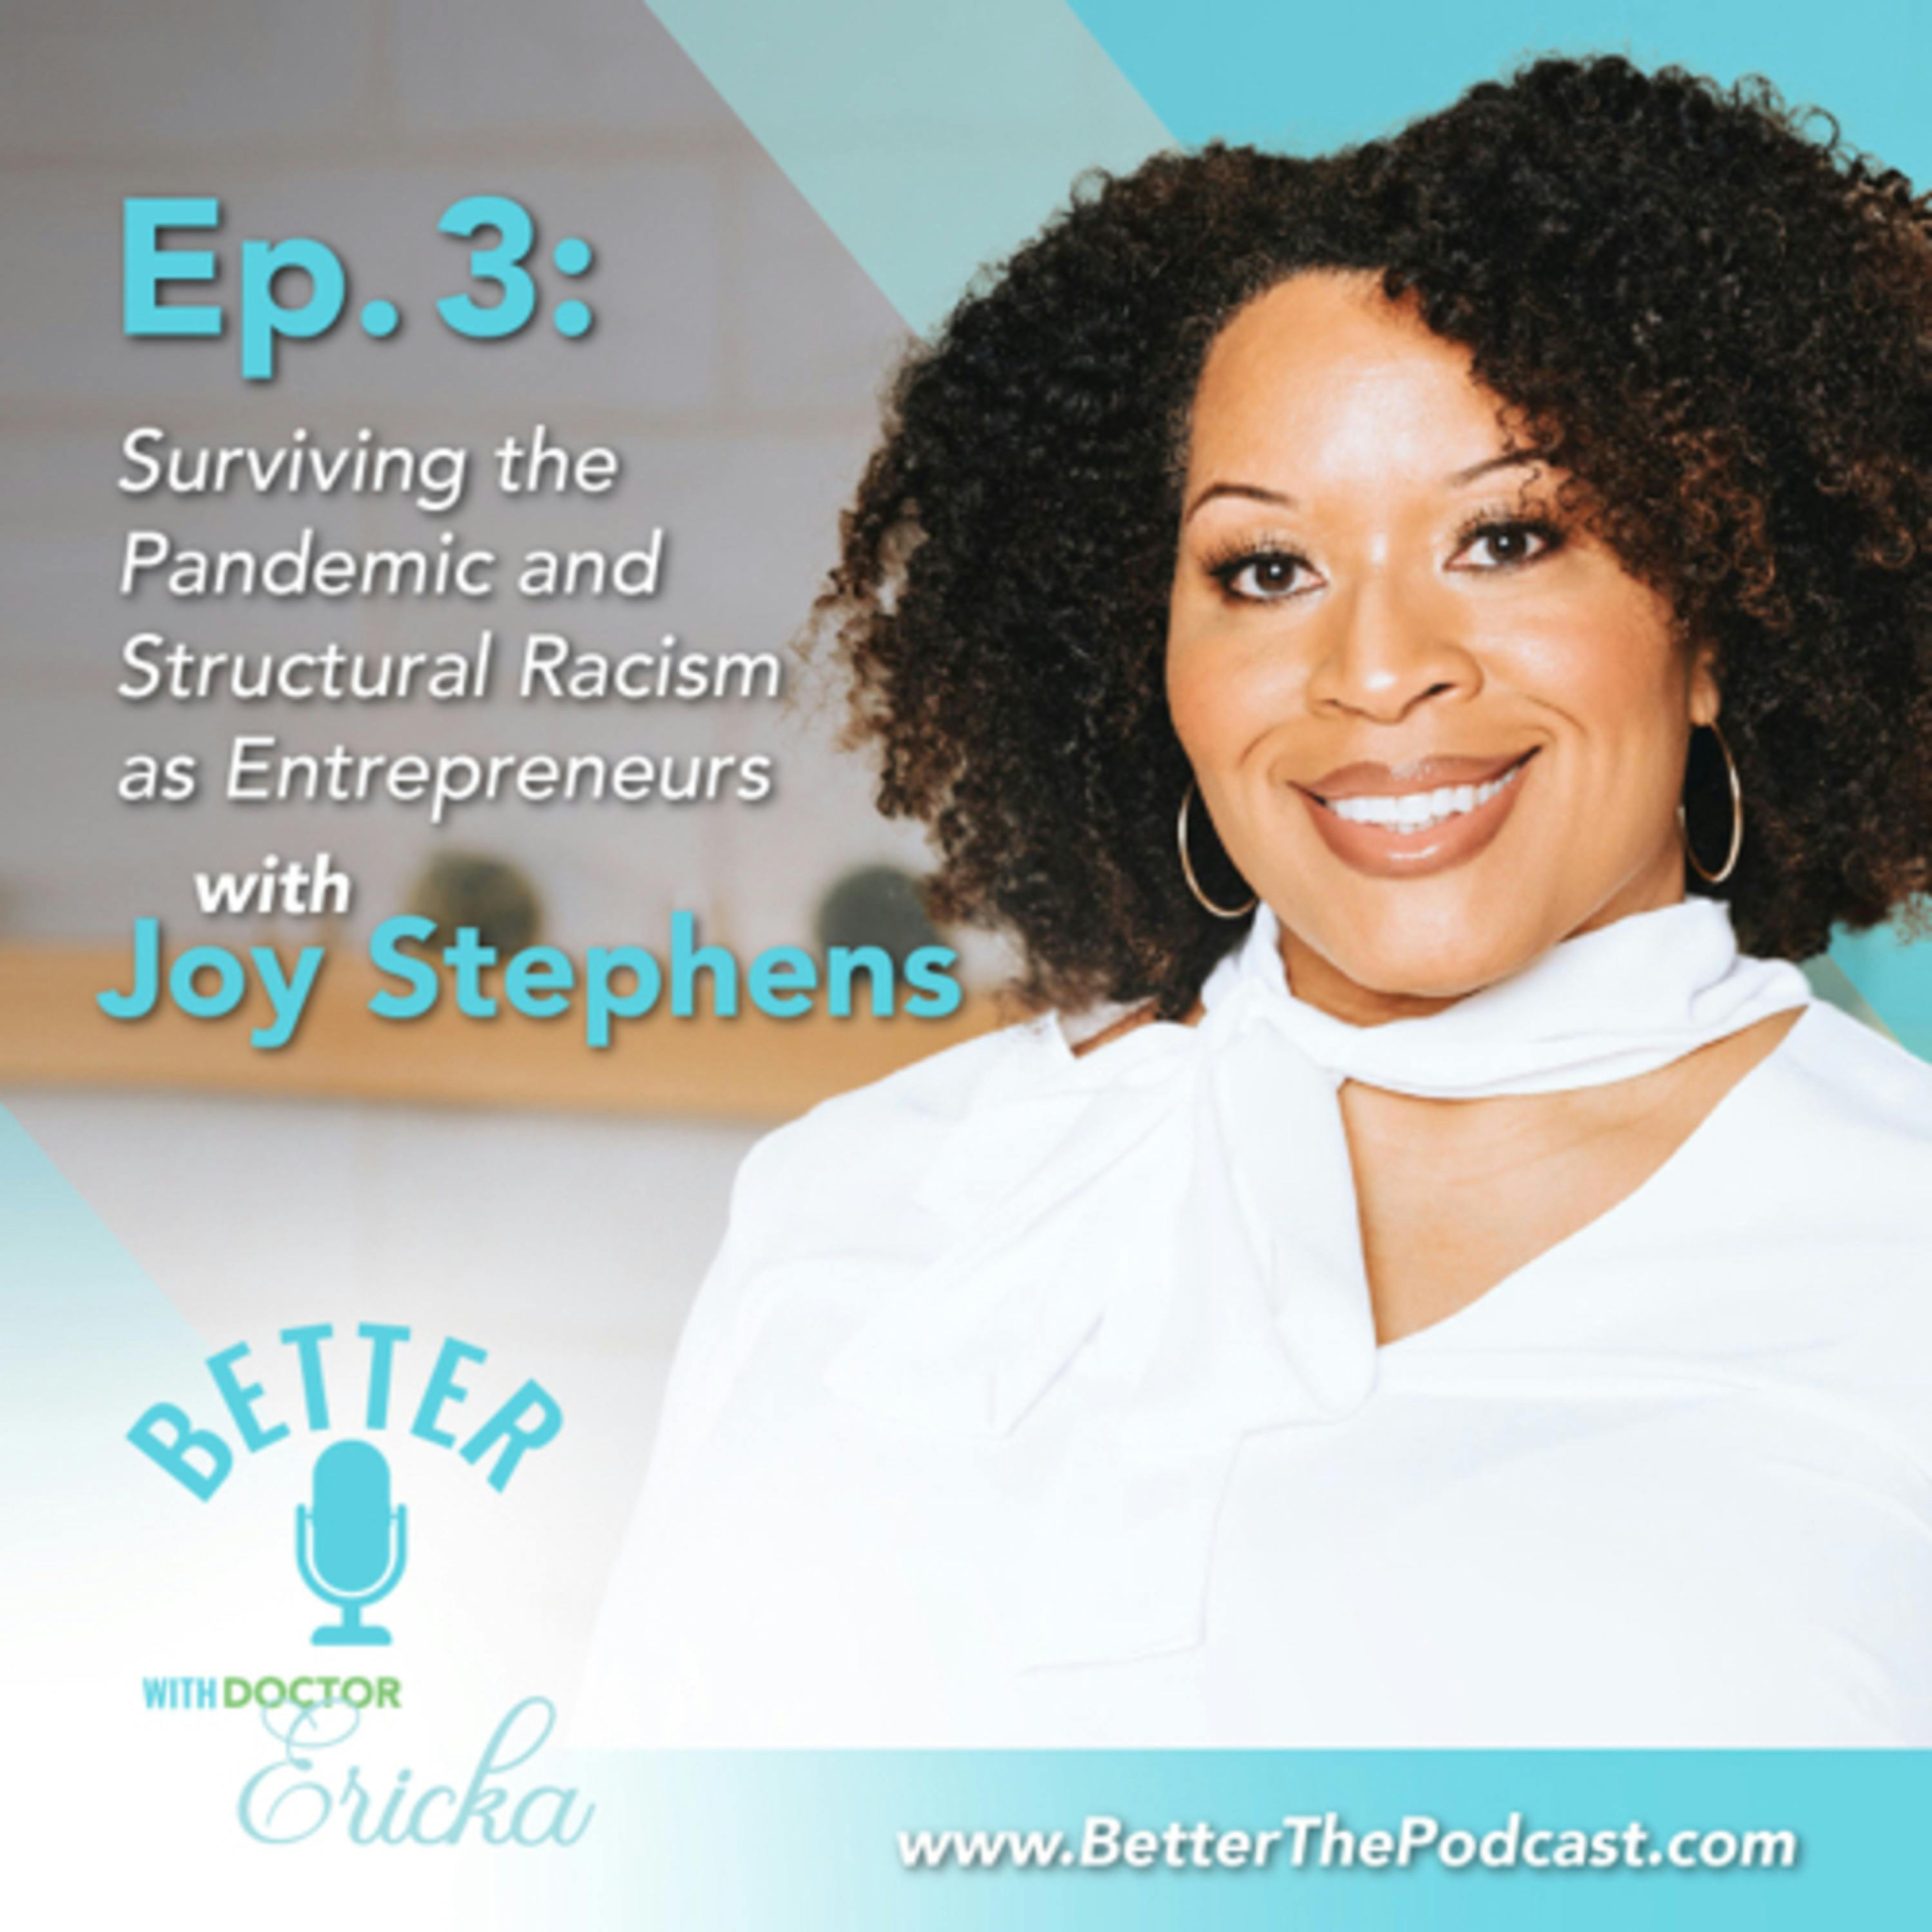 Surviving the Pandemic and Structural Racism as Entrepreneurs with Joy Stephens